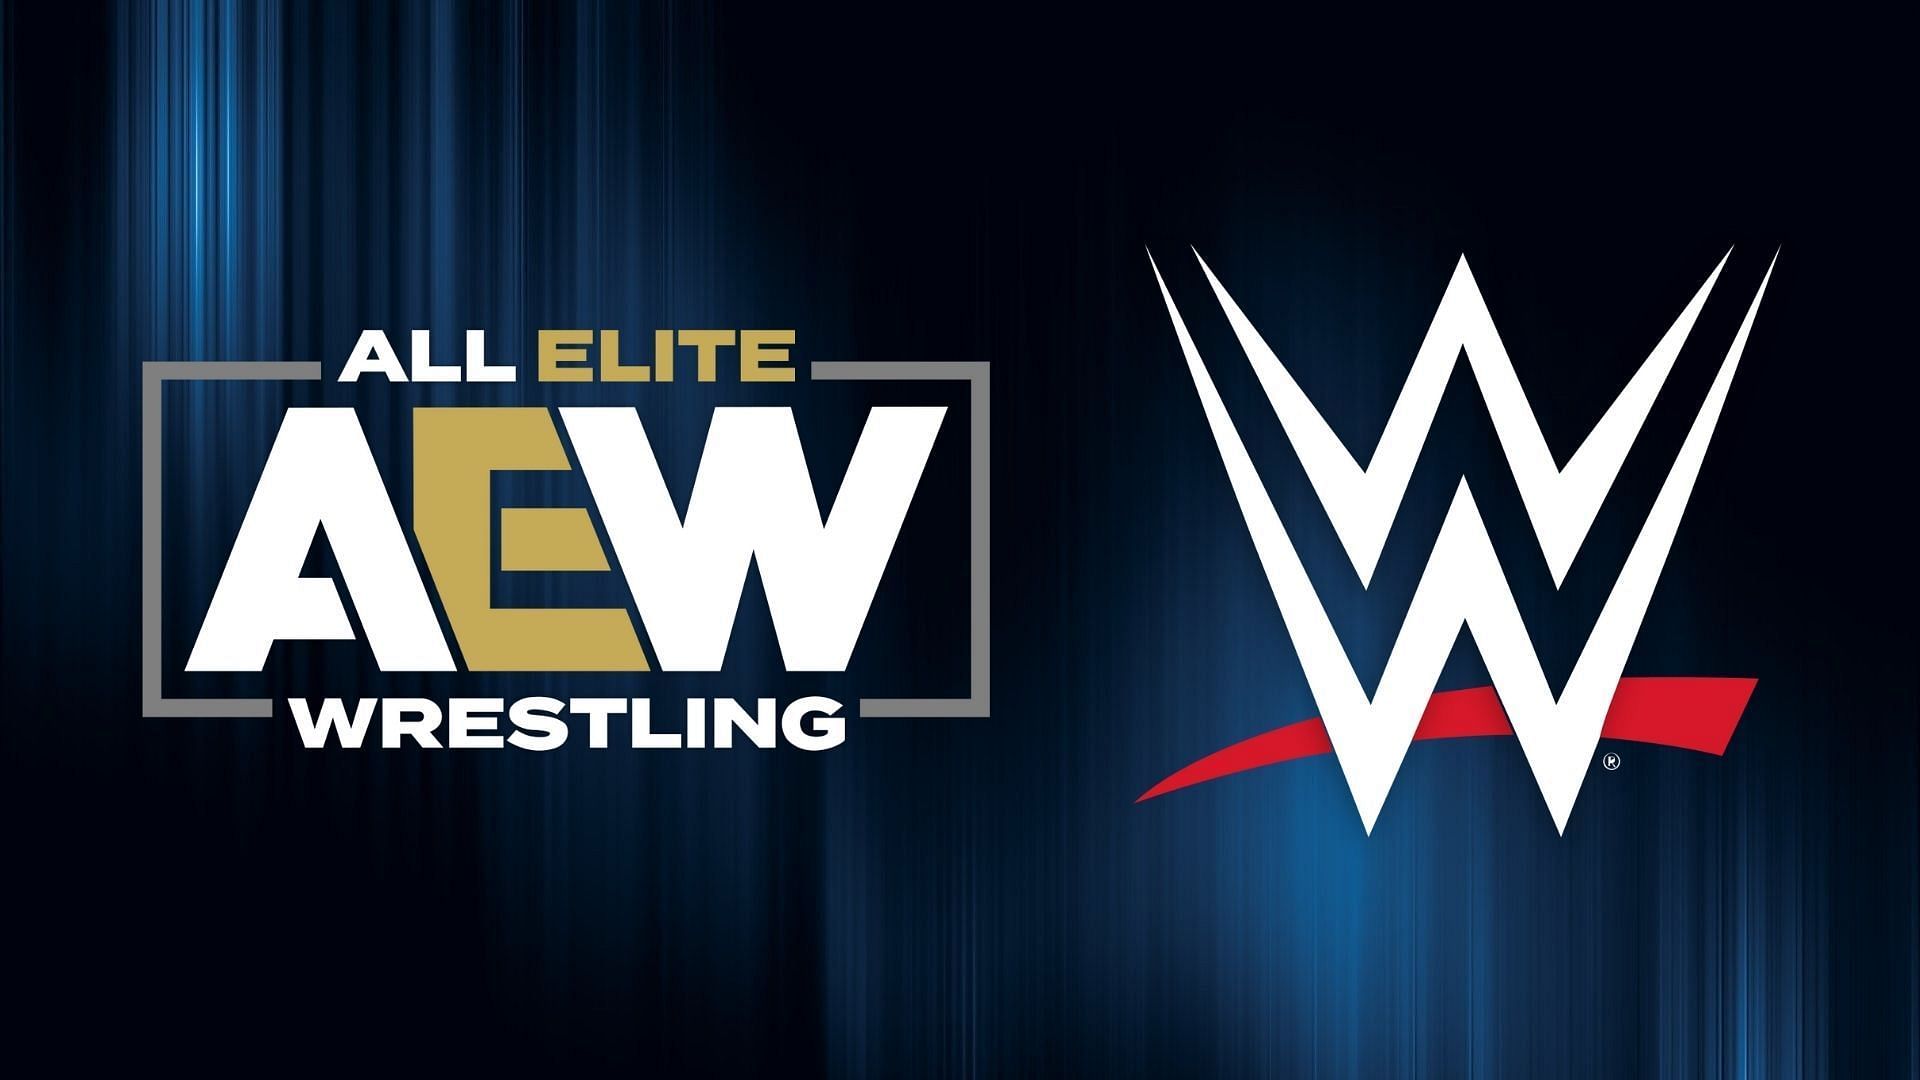 A former AEW star is reportedly set to sign with WWE soon.